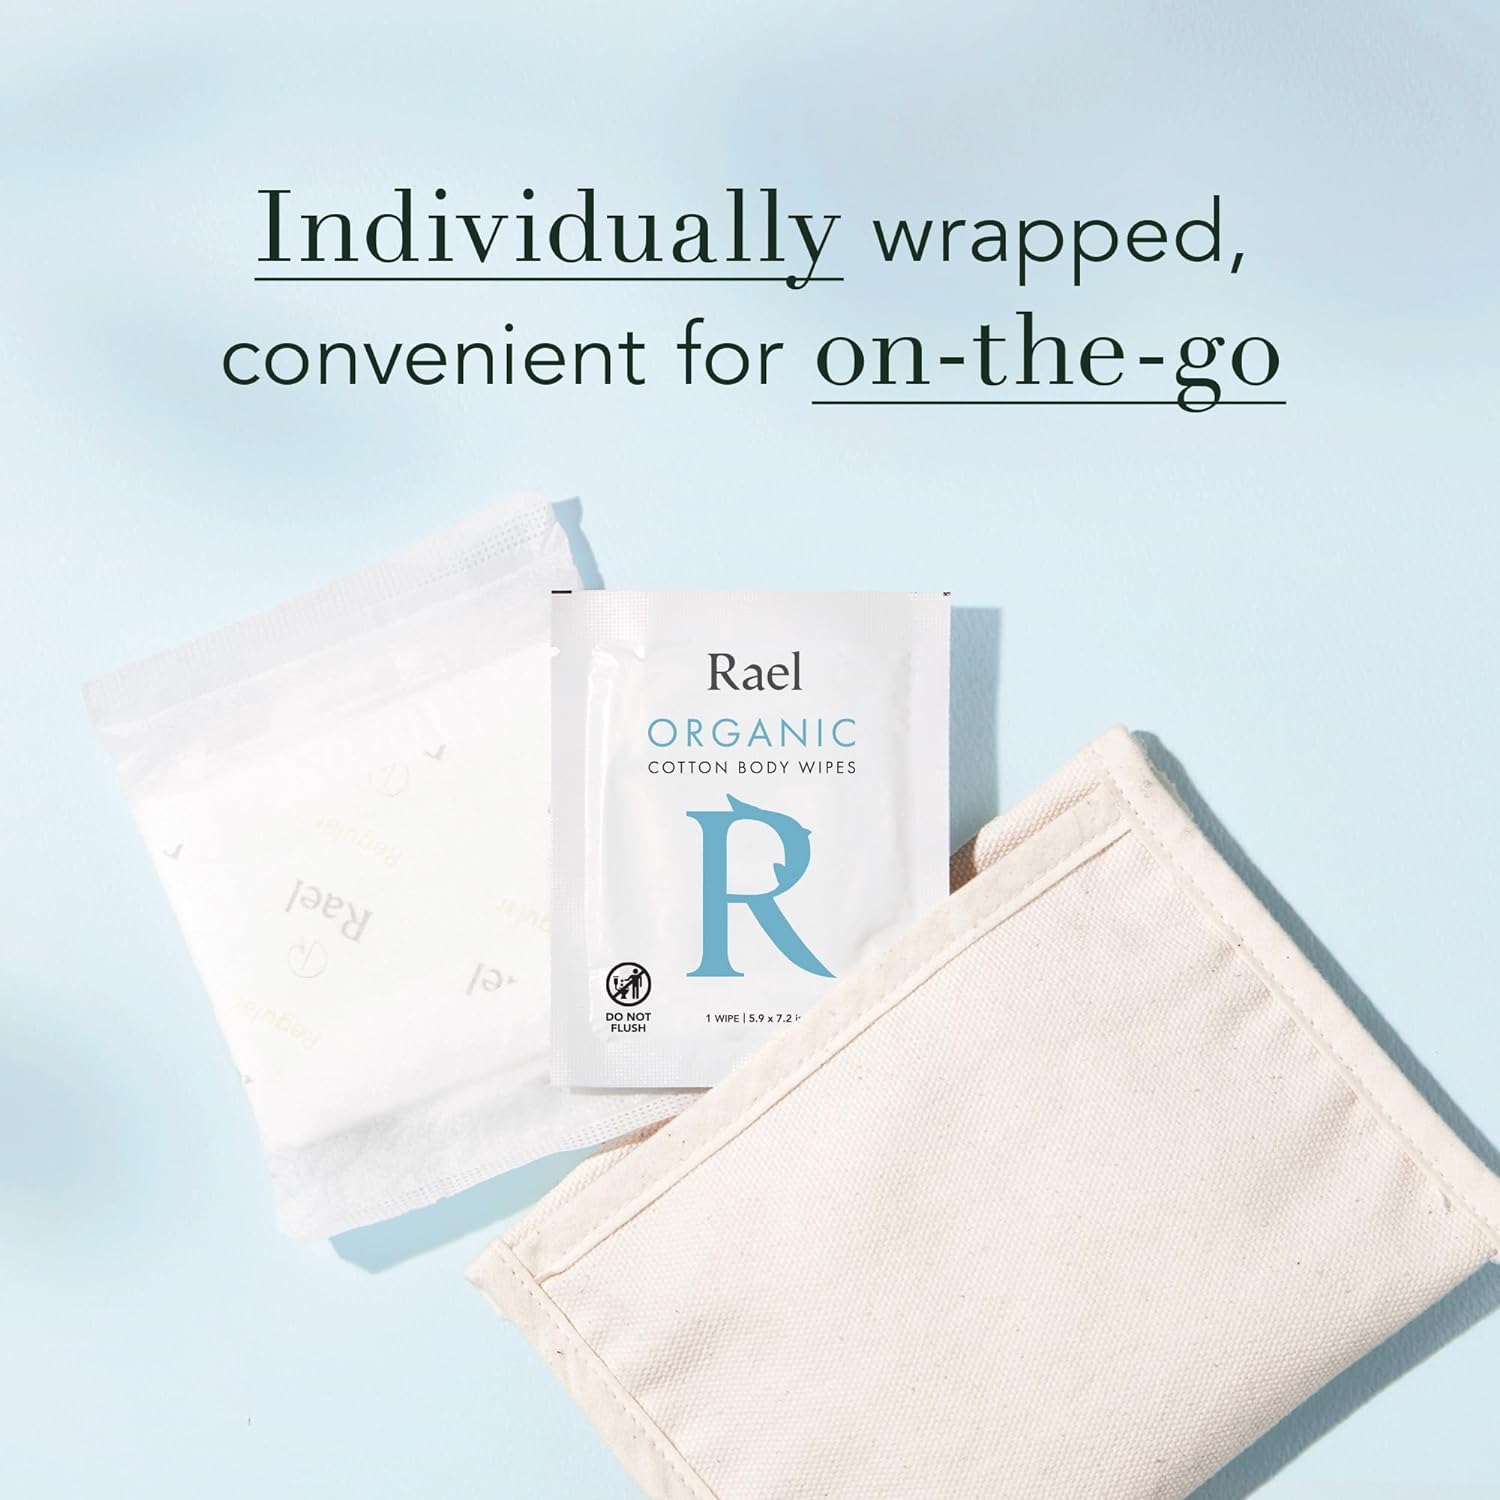 Rael Body Wipes, Organic Cotton Wipes for Women - Unscented Body Wipes, Individually Wrapped, All Skin Types, Vegan, Cruelty Free (10 Count, Pack of 2) : Health & Household